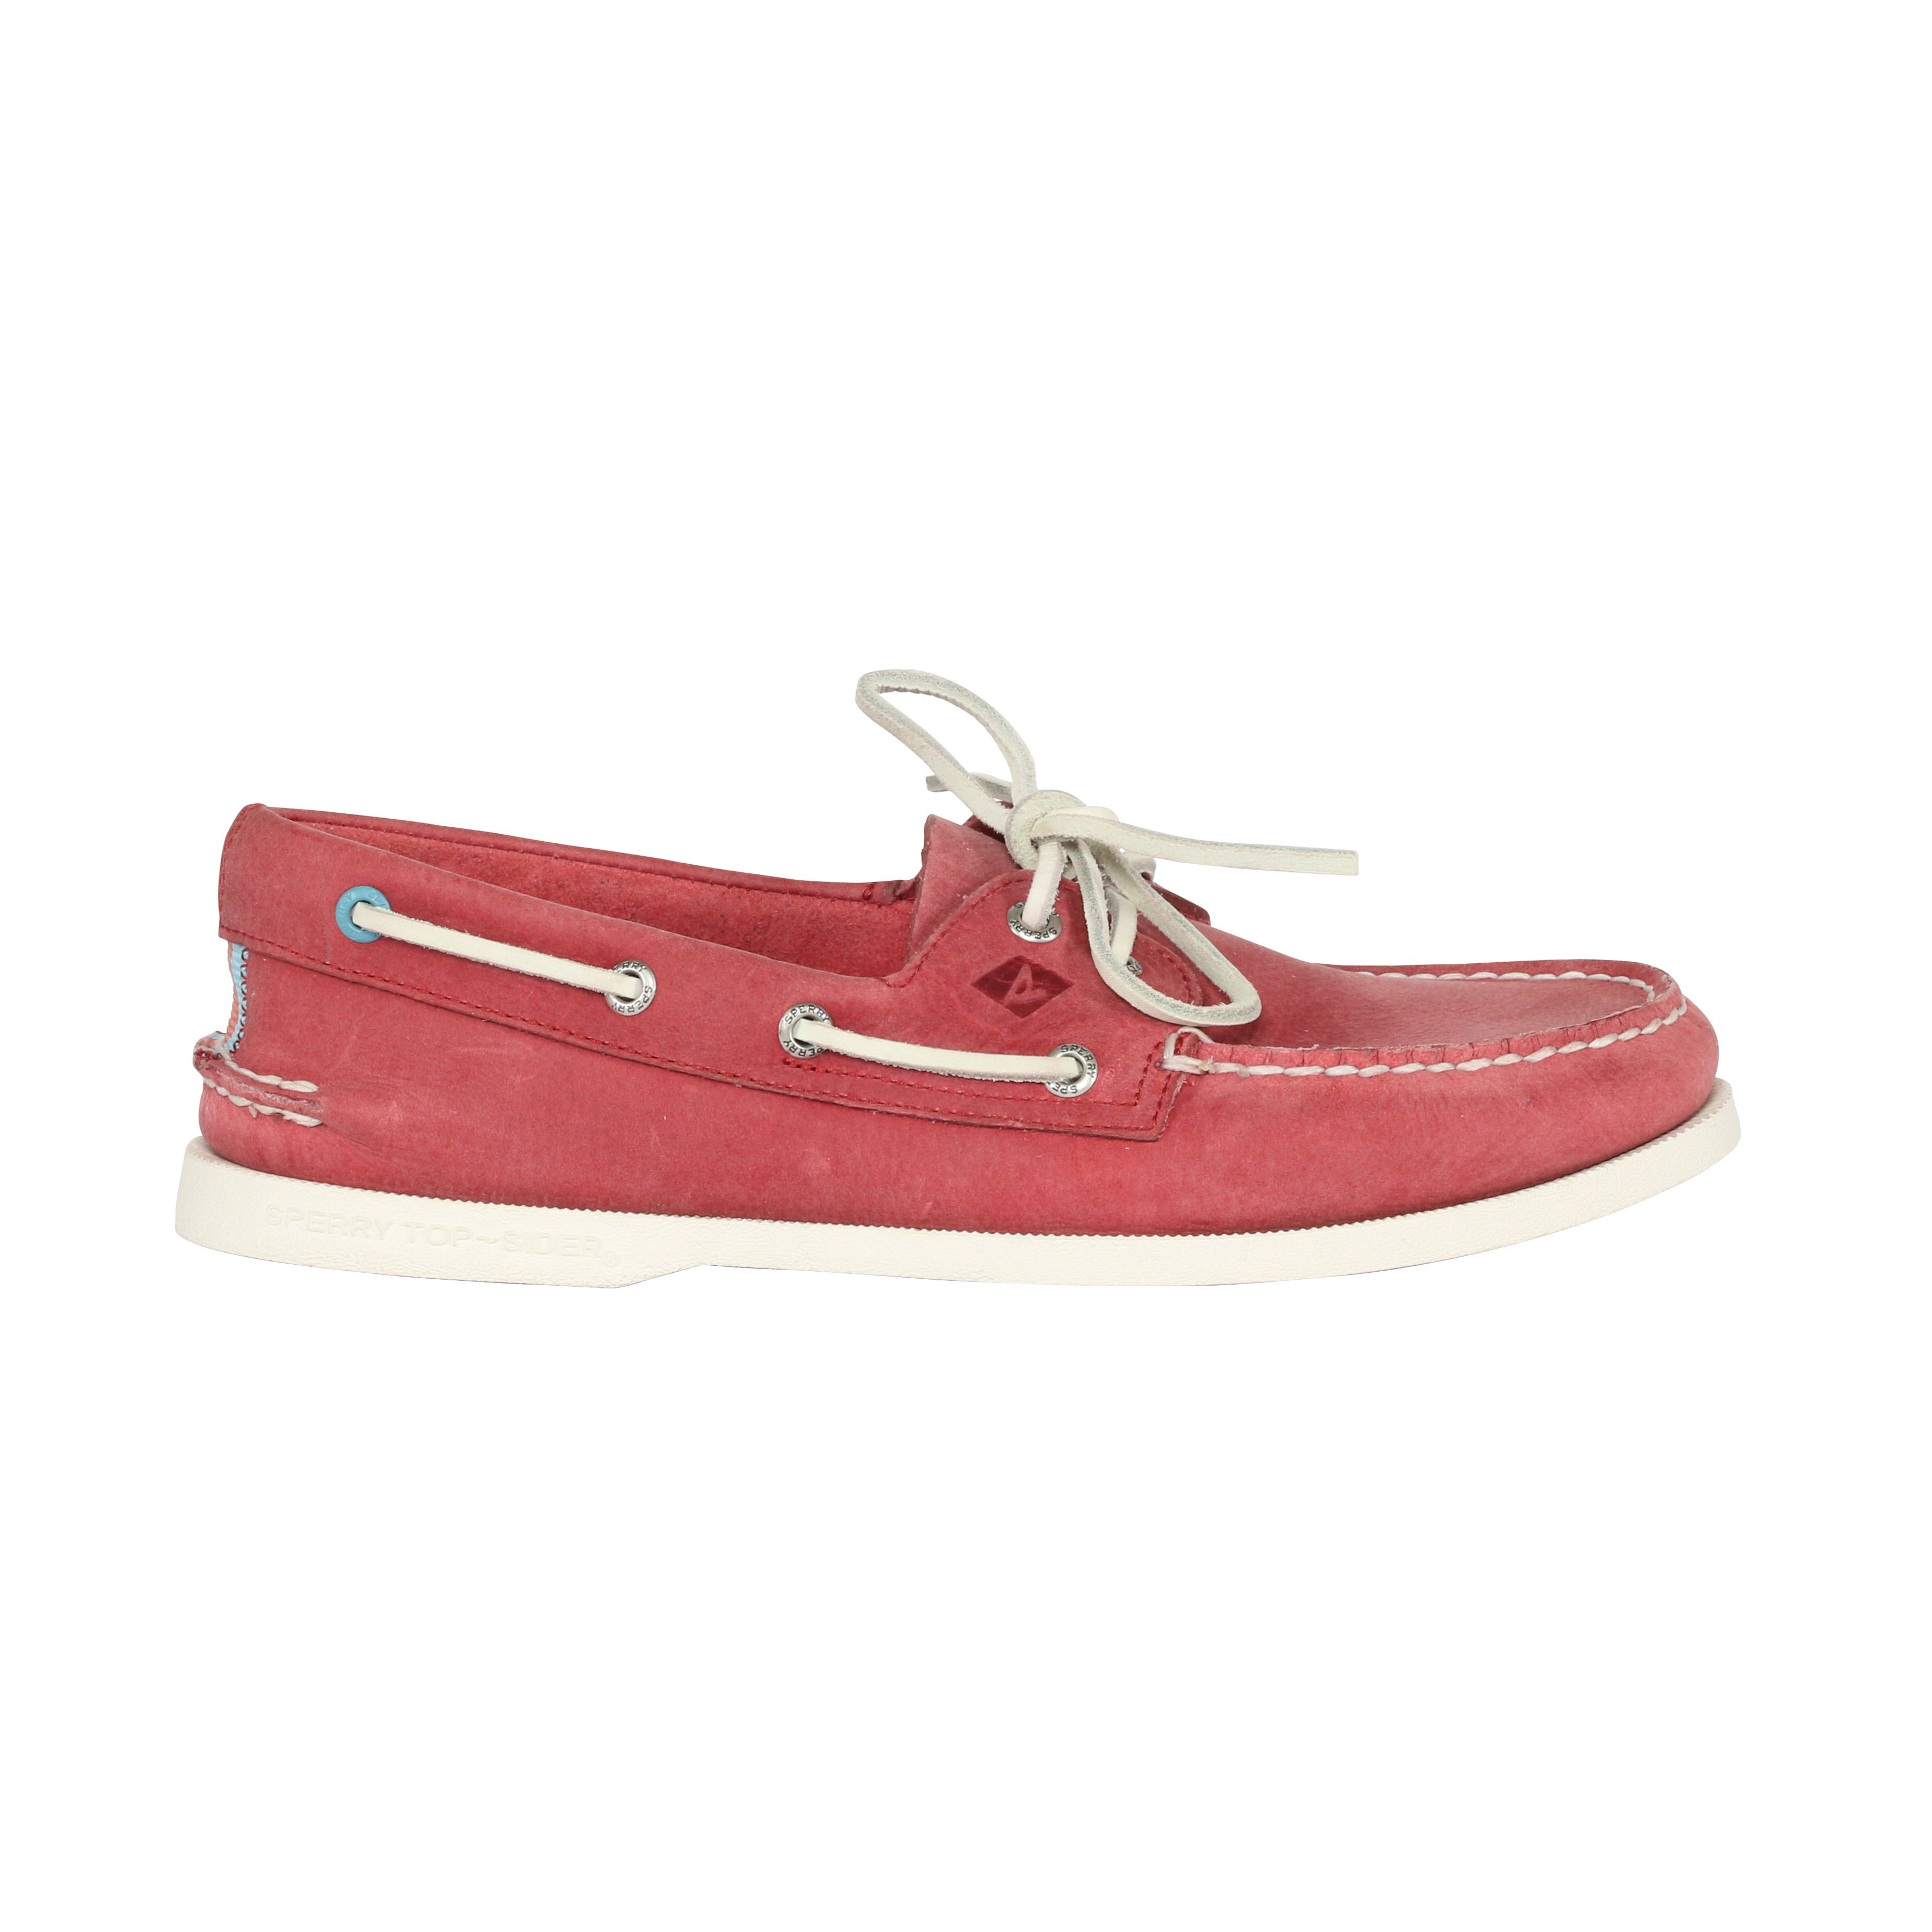 Sperry Authentic Original Leather Boat 